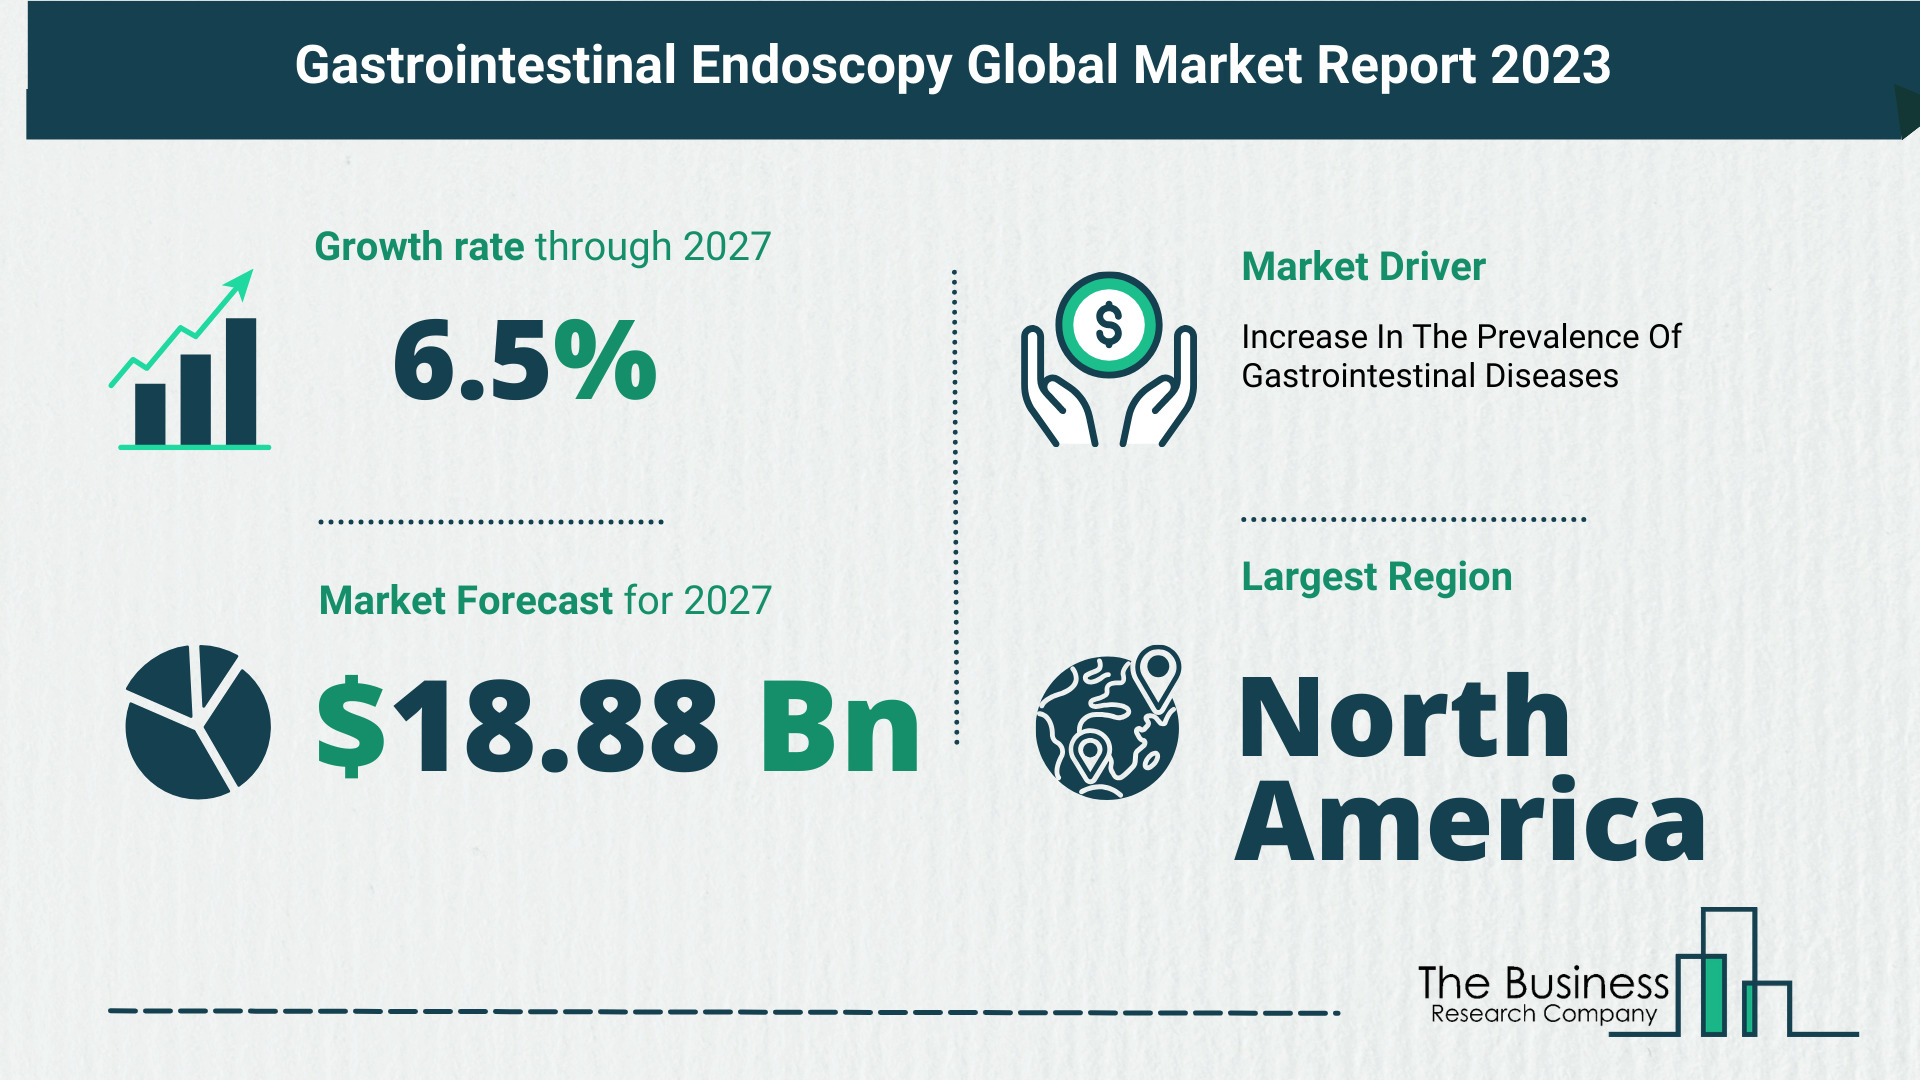 What Is The Forecast Growth Rate For The Gastrointestinal Endoscopy Market?